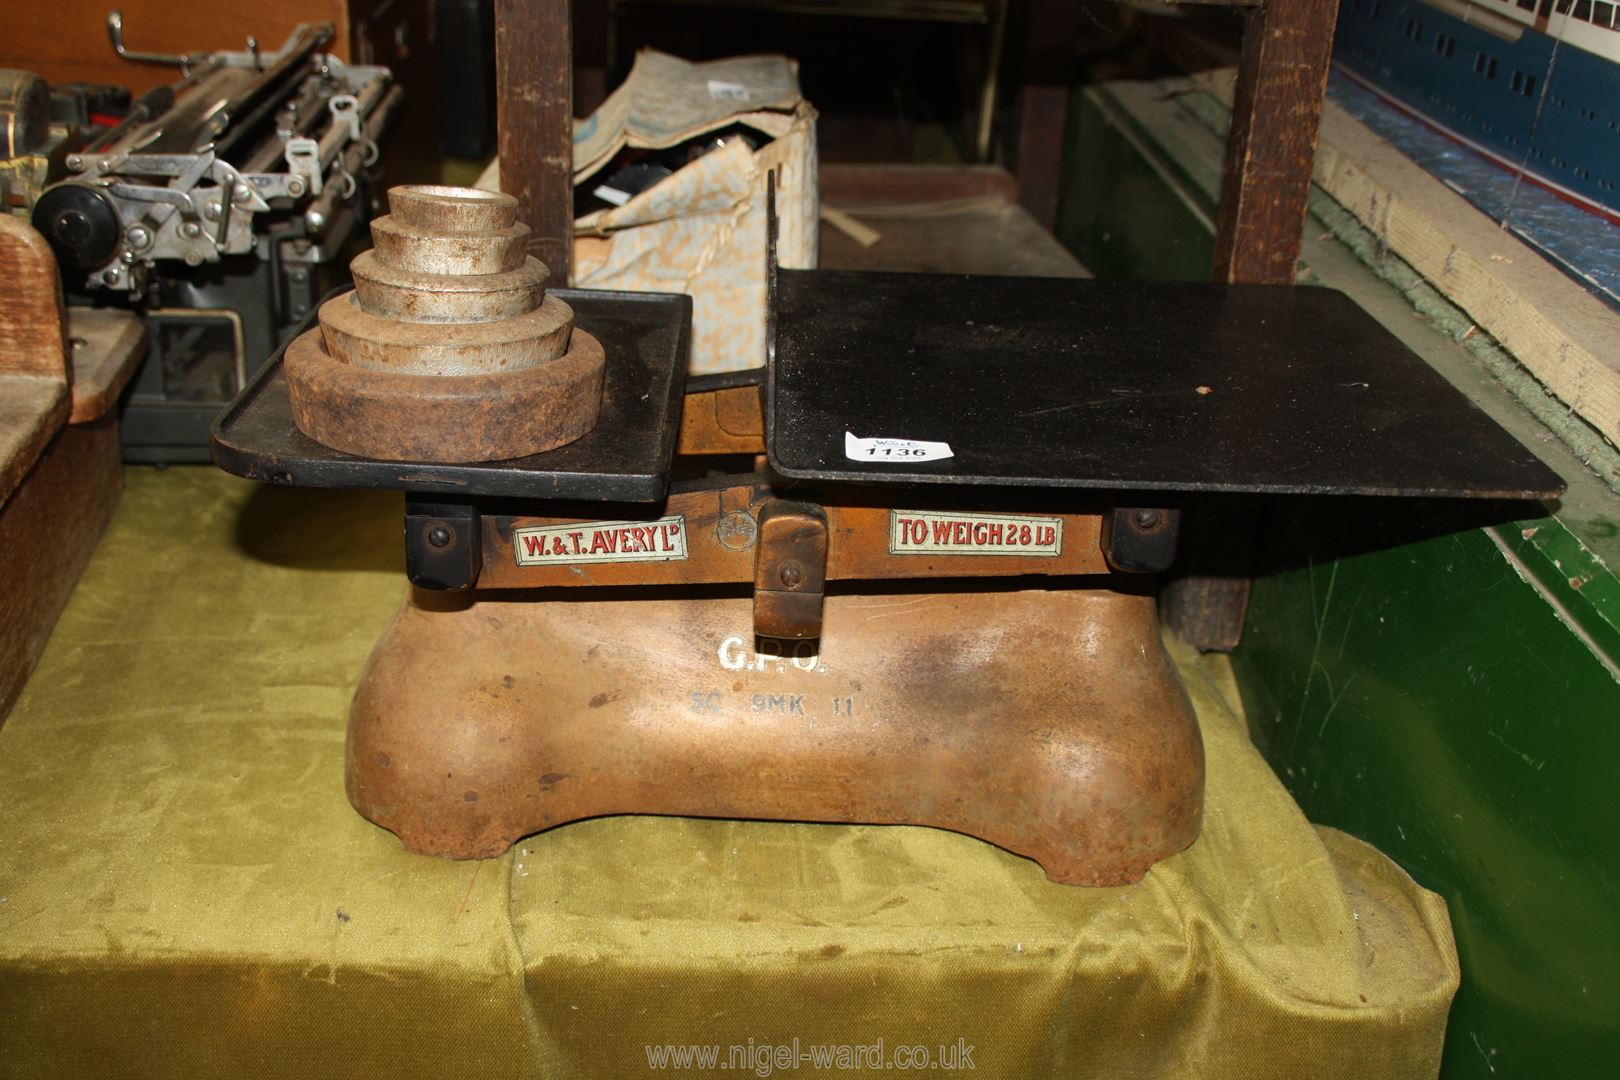 A Post Office Scales with weights by W & T Avery, Birmingham G.P.O.